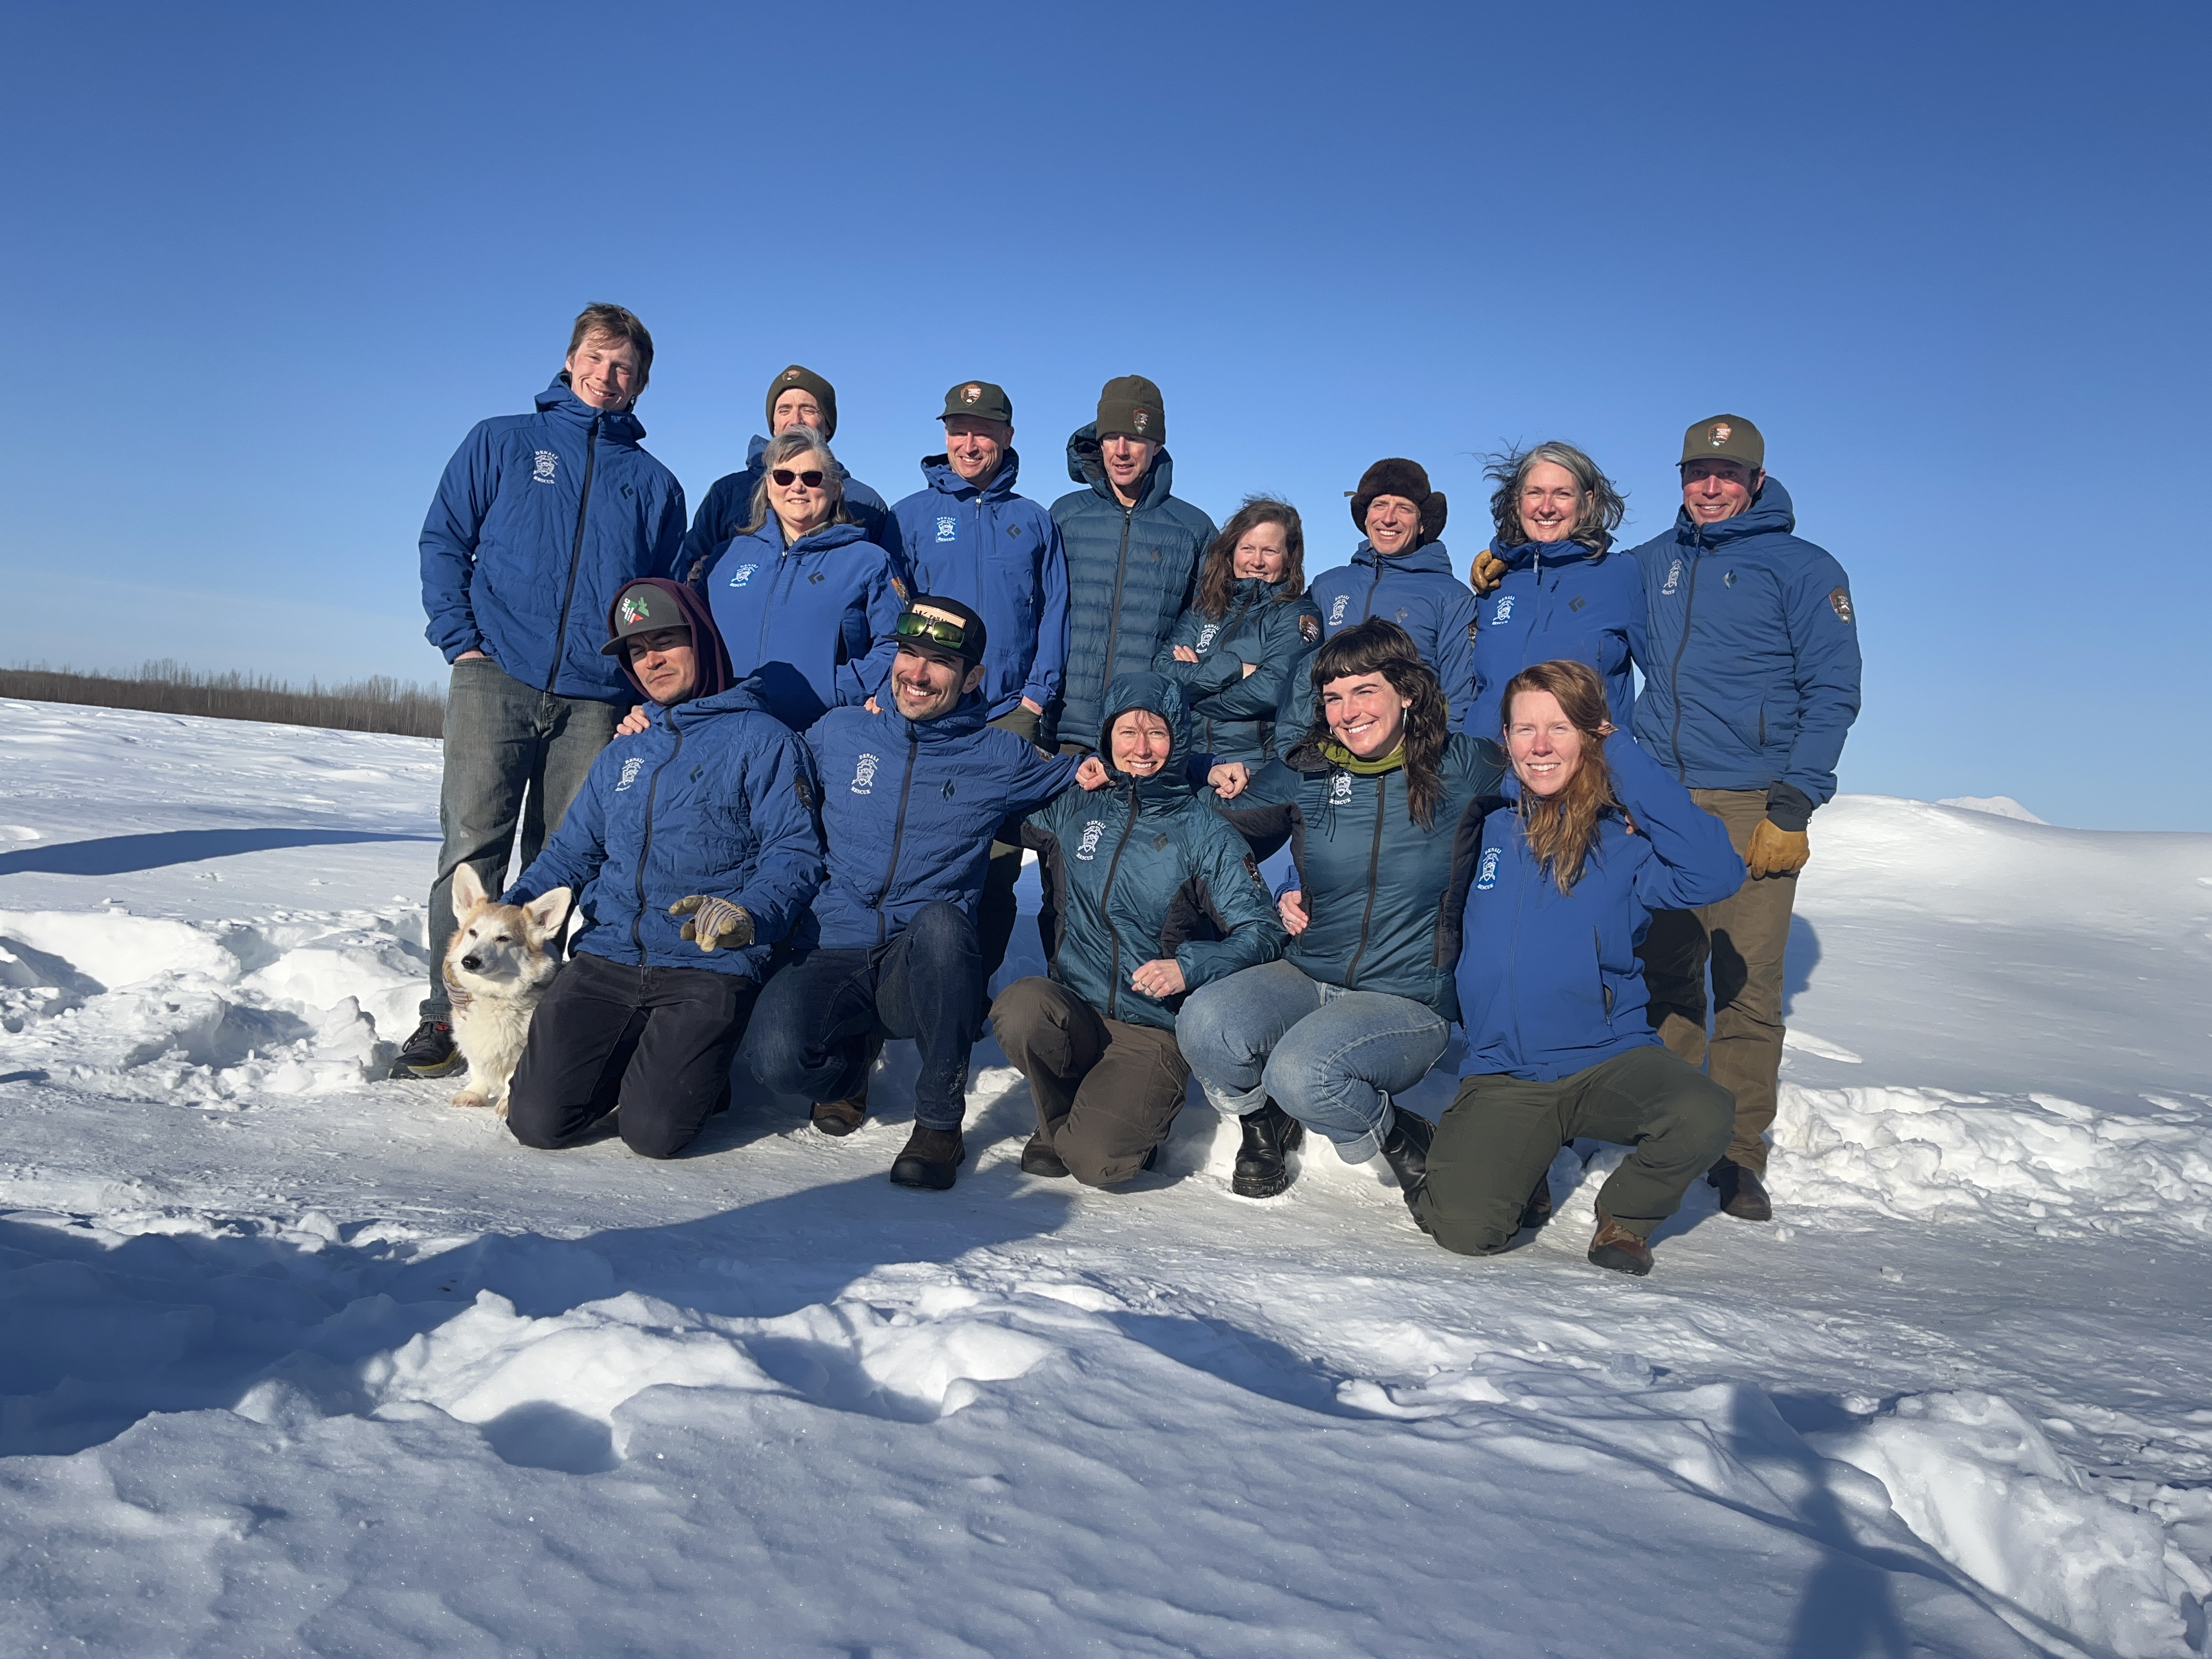 A Welsh corgi and a team of 14 rangers in blue winter jackets pose on a snowbank on a sunny day.